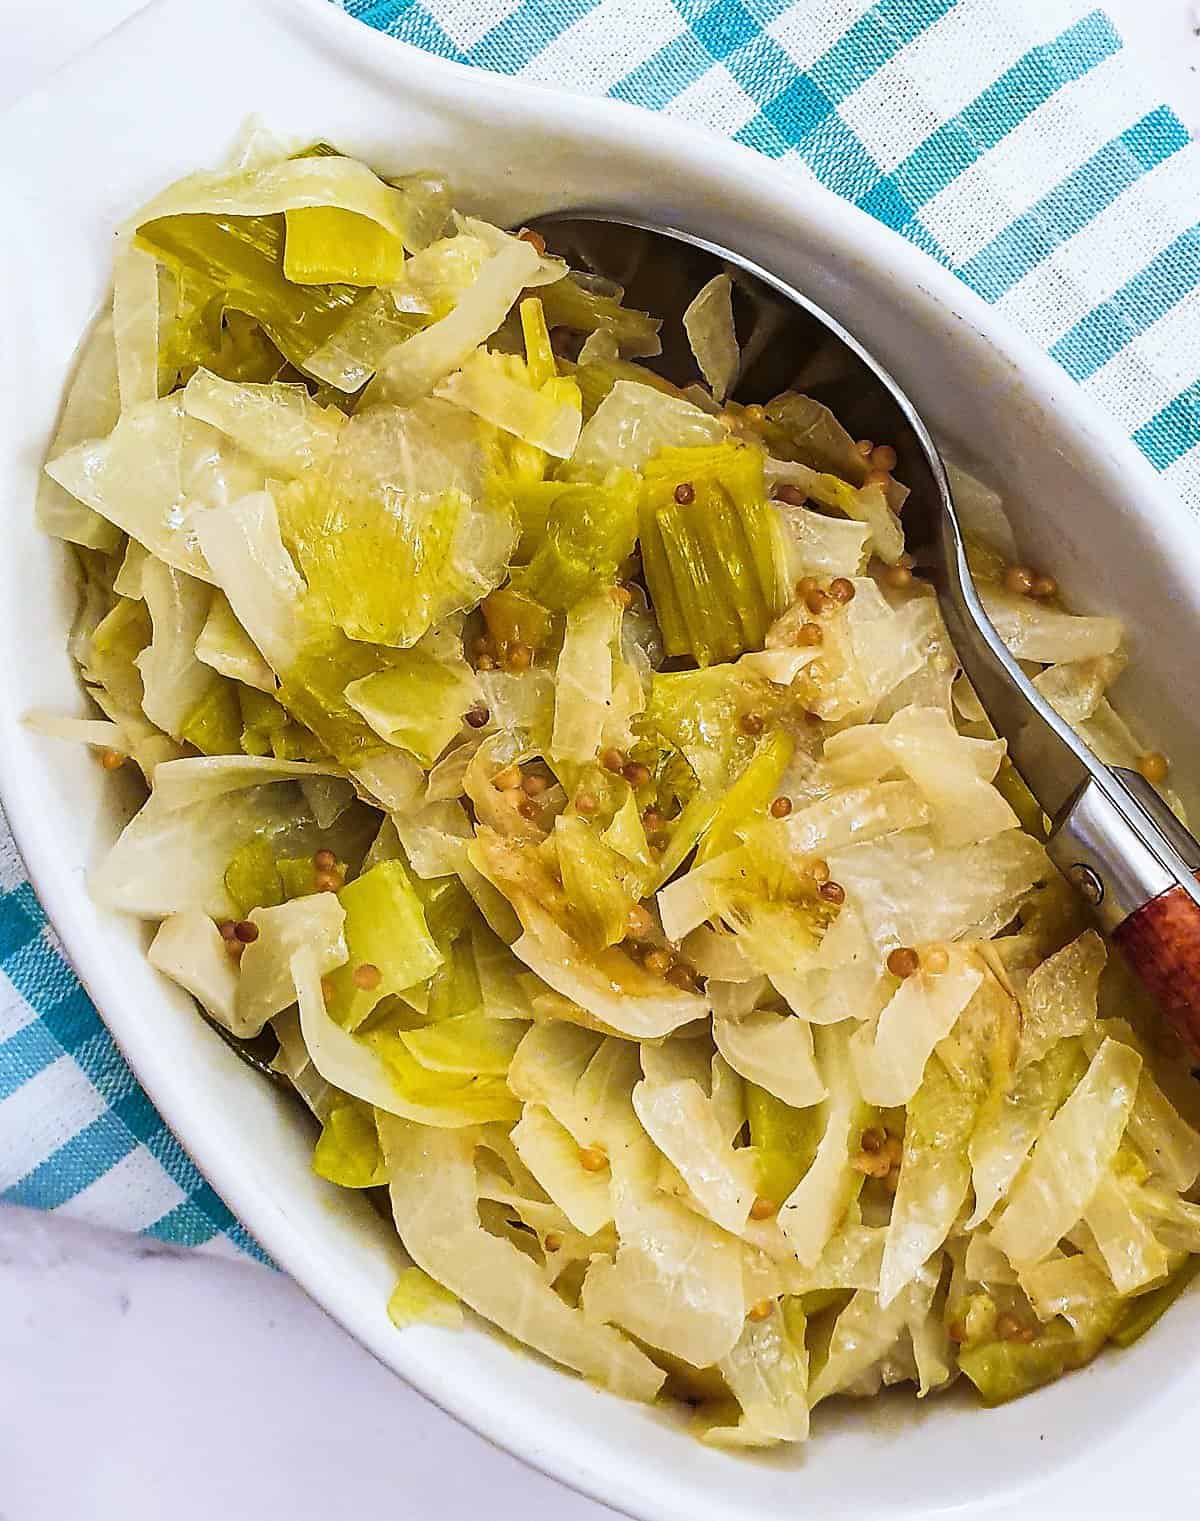 Overhead view of a dish full of buttered cabbage with mustard seeds and leeks on top and a serving spoon.